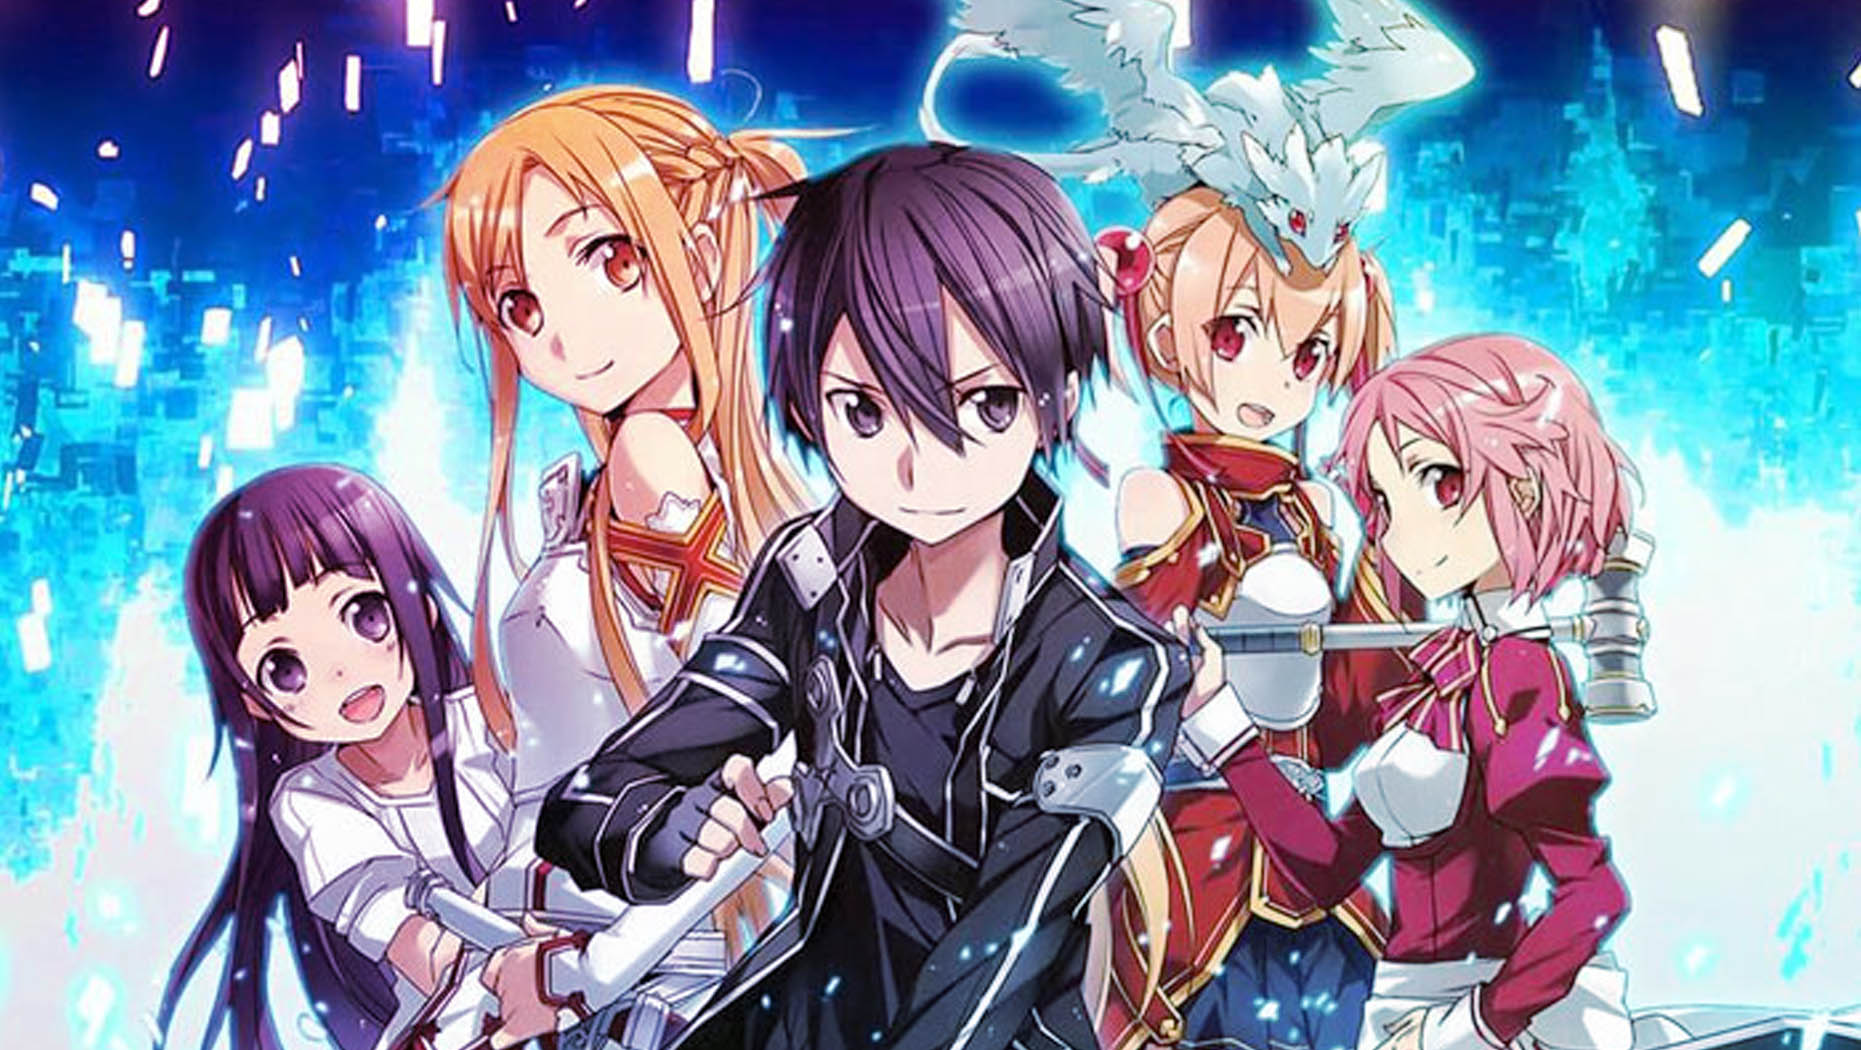 Sword Art Online Season 4 - Expected Release Date and Plot - Daily Research  Plot